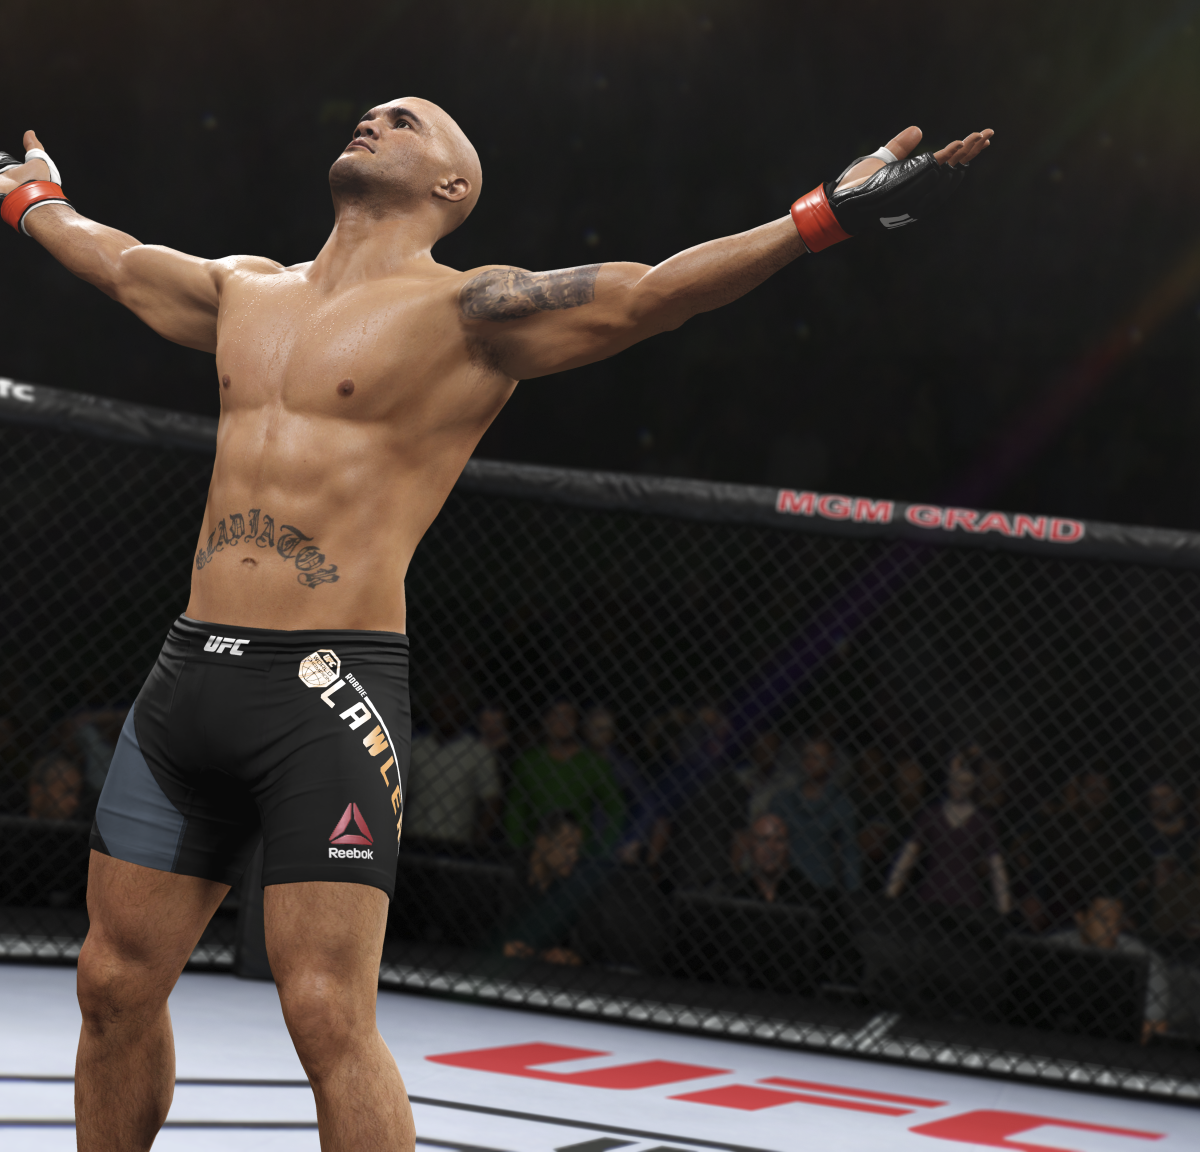 EA Sports UFC 4 - All Fighters  List (PS4 HD) [1080p60FPS] 